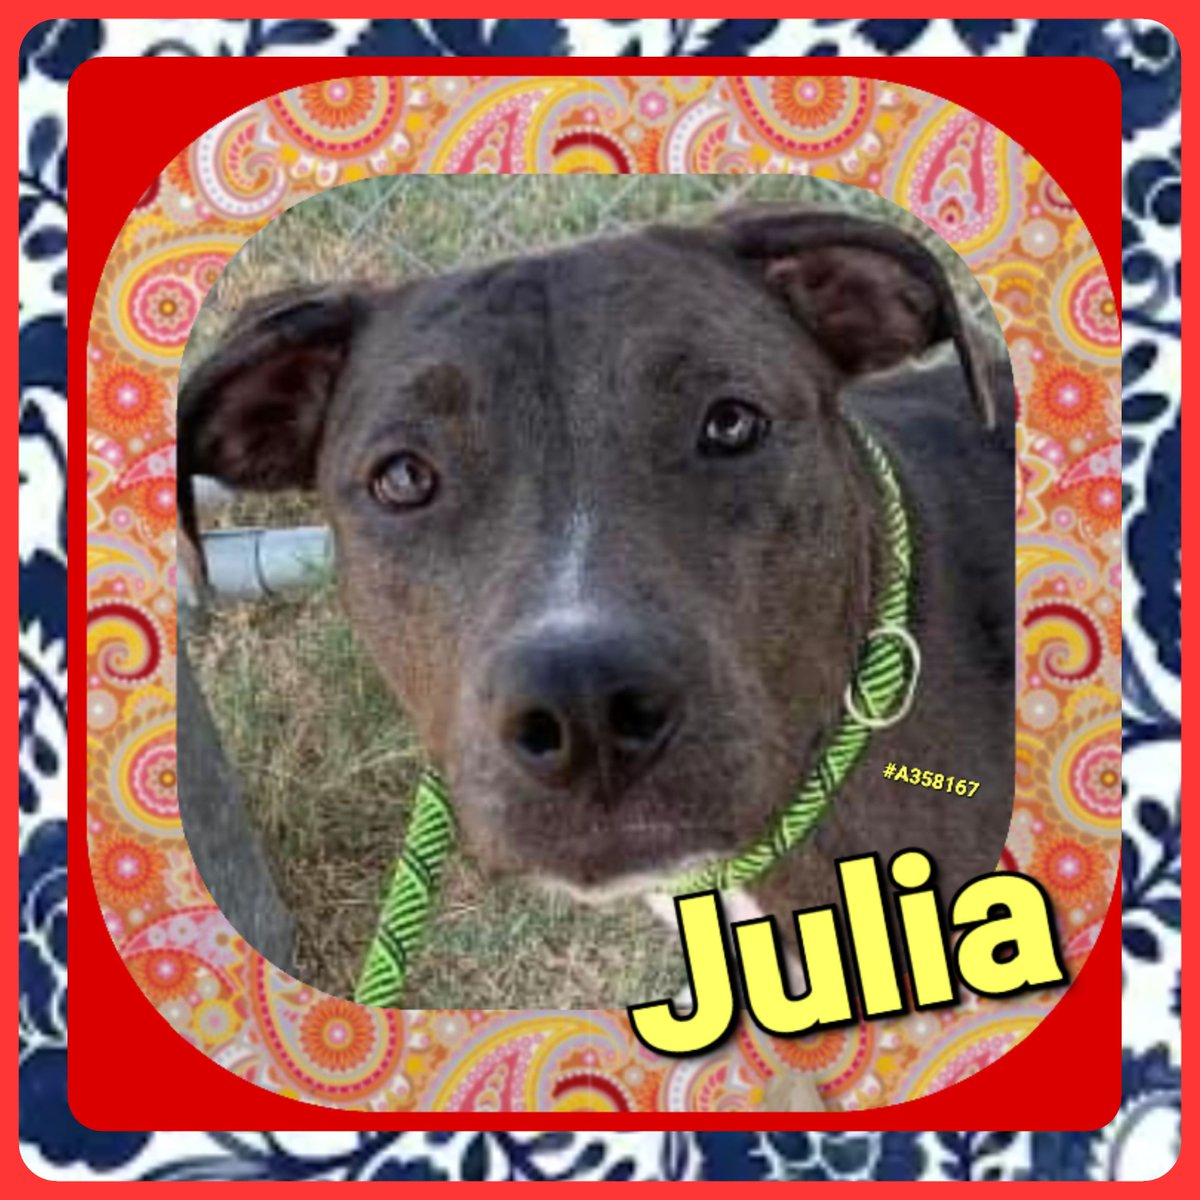 🚨🐕⏰️ JULIA #A358167 🚨⏰ 🐕 At only 1yo this APBT is doomed to DIE on 8/31🔥 Why? Because she is SCARED spitless! Look at the PAIN in that face 😢🖤 We can SAVE her! Please pledge for RESCUE🙏 Contact CORPUS CHRISTI ANIMAL CARE 📧 ccacsrescues@cctexas.com 📞 361-826-4630